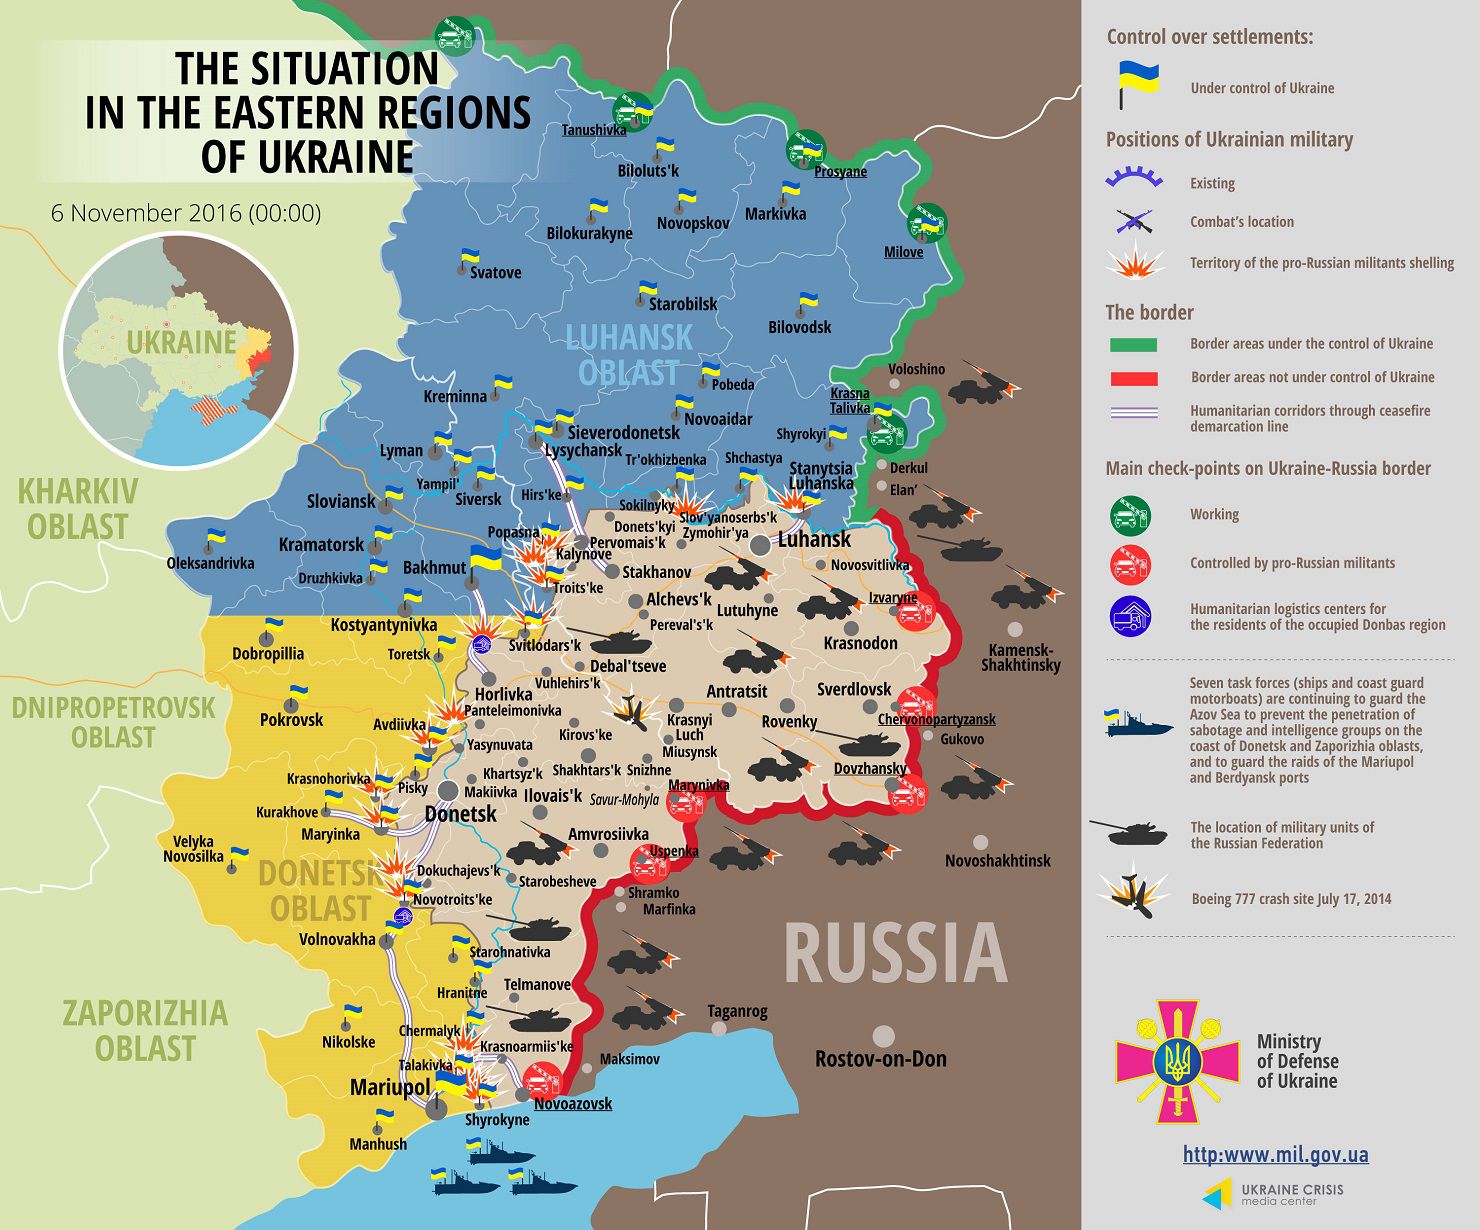 Russia`s hybrid military forces used artillery to shell Ukraine troops in Donetsk, Luhansk regions